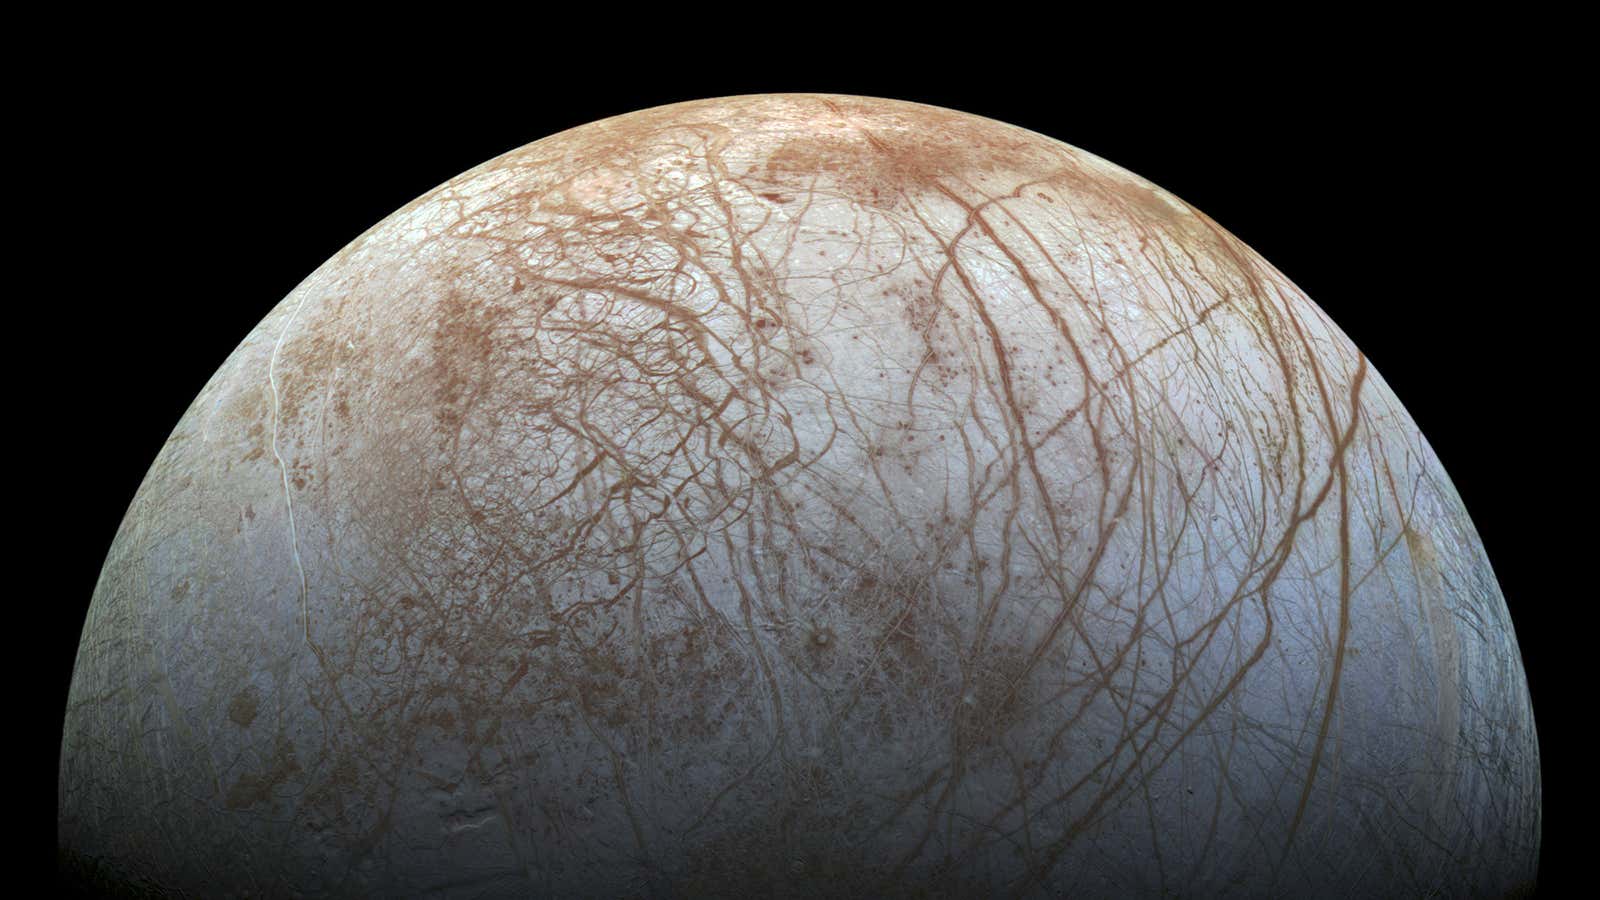 Europa: the next frontier.